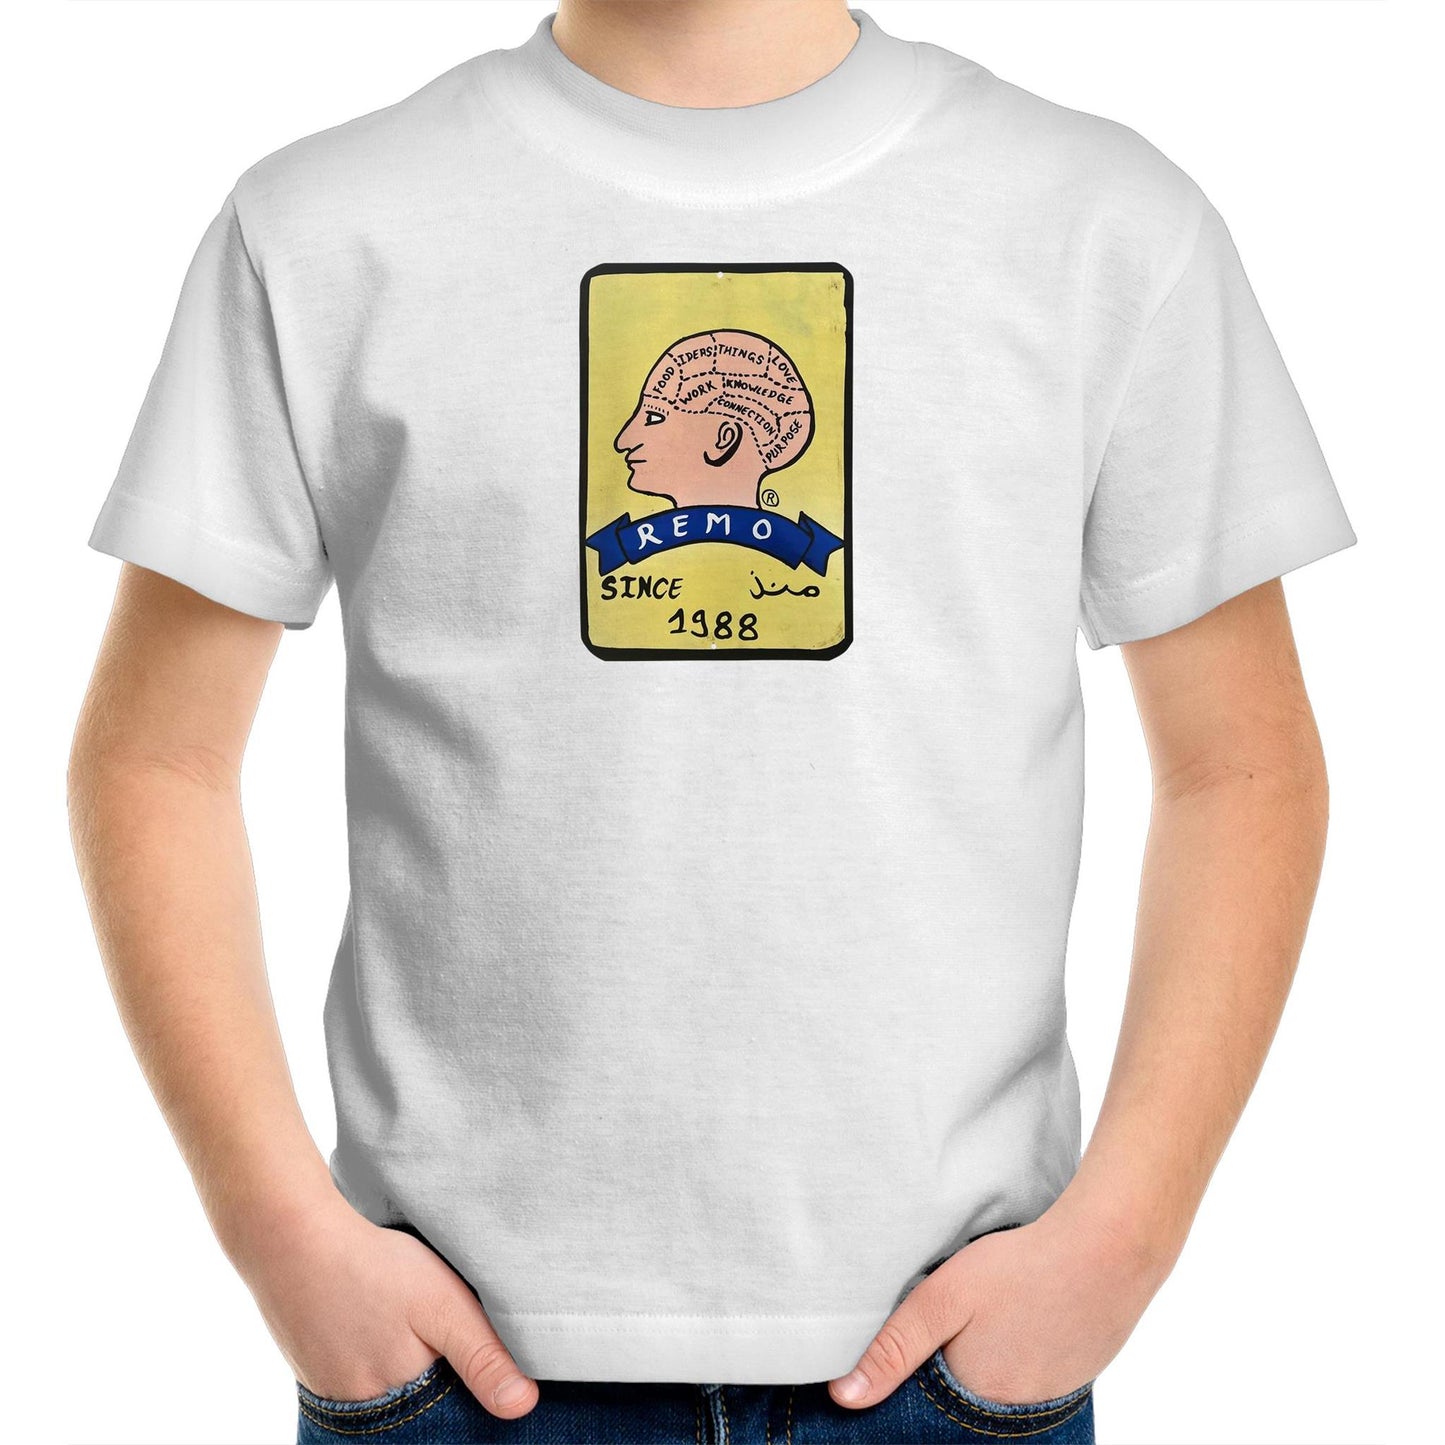 REMO Head Morocco T Shirts for Kids